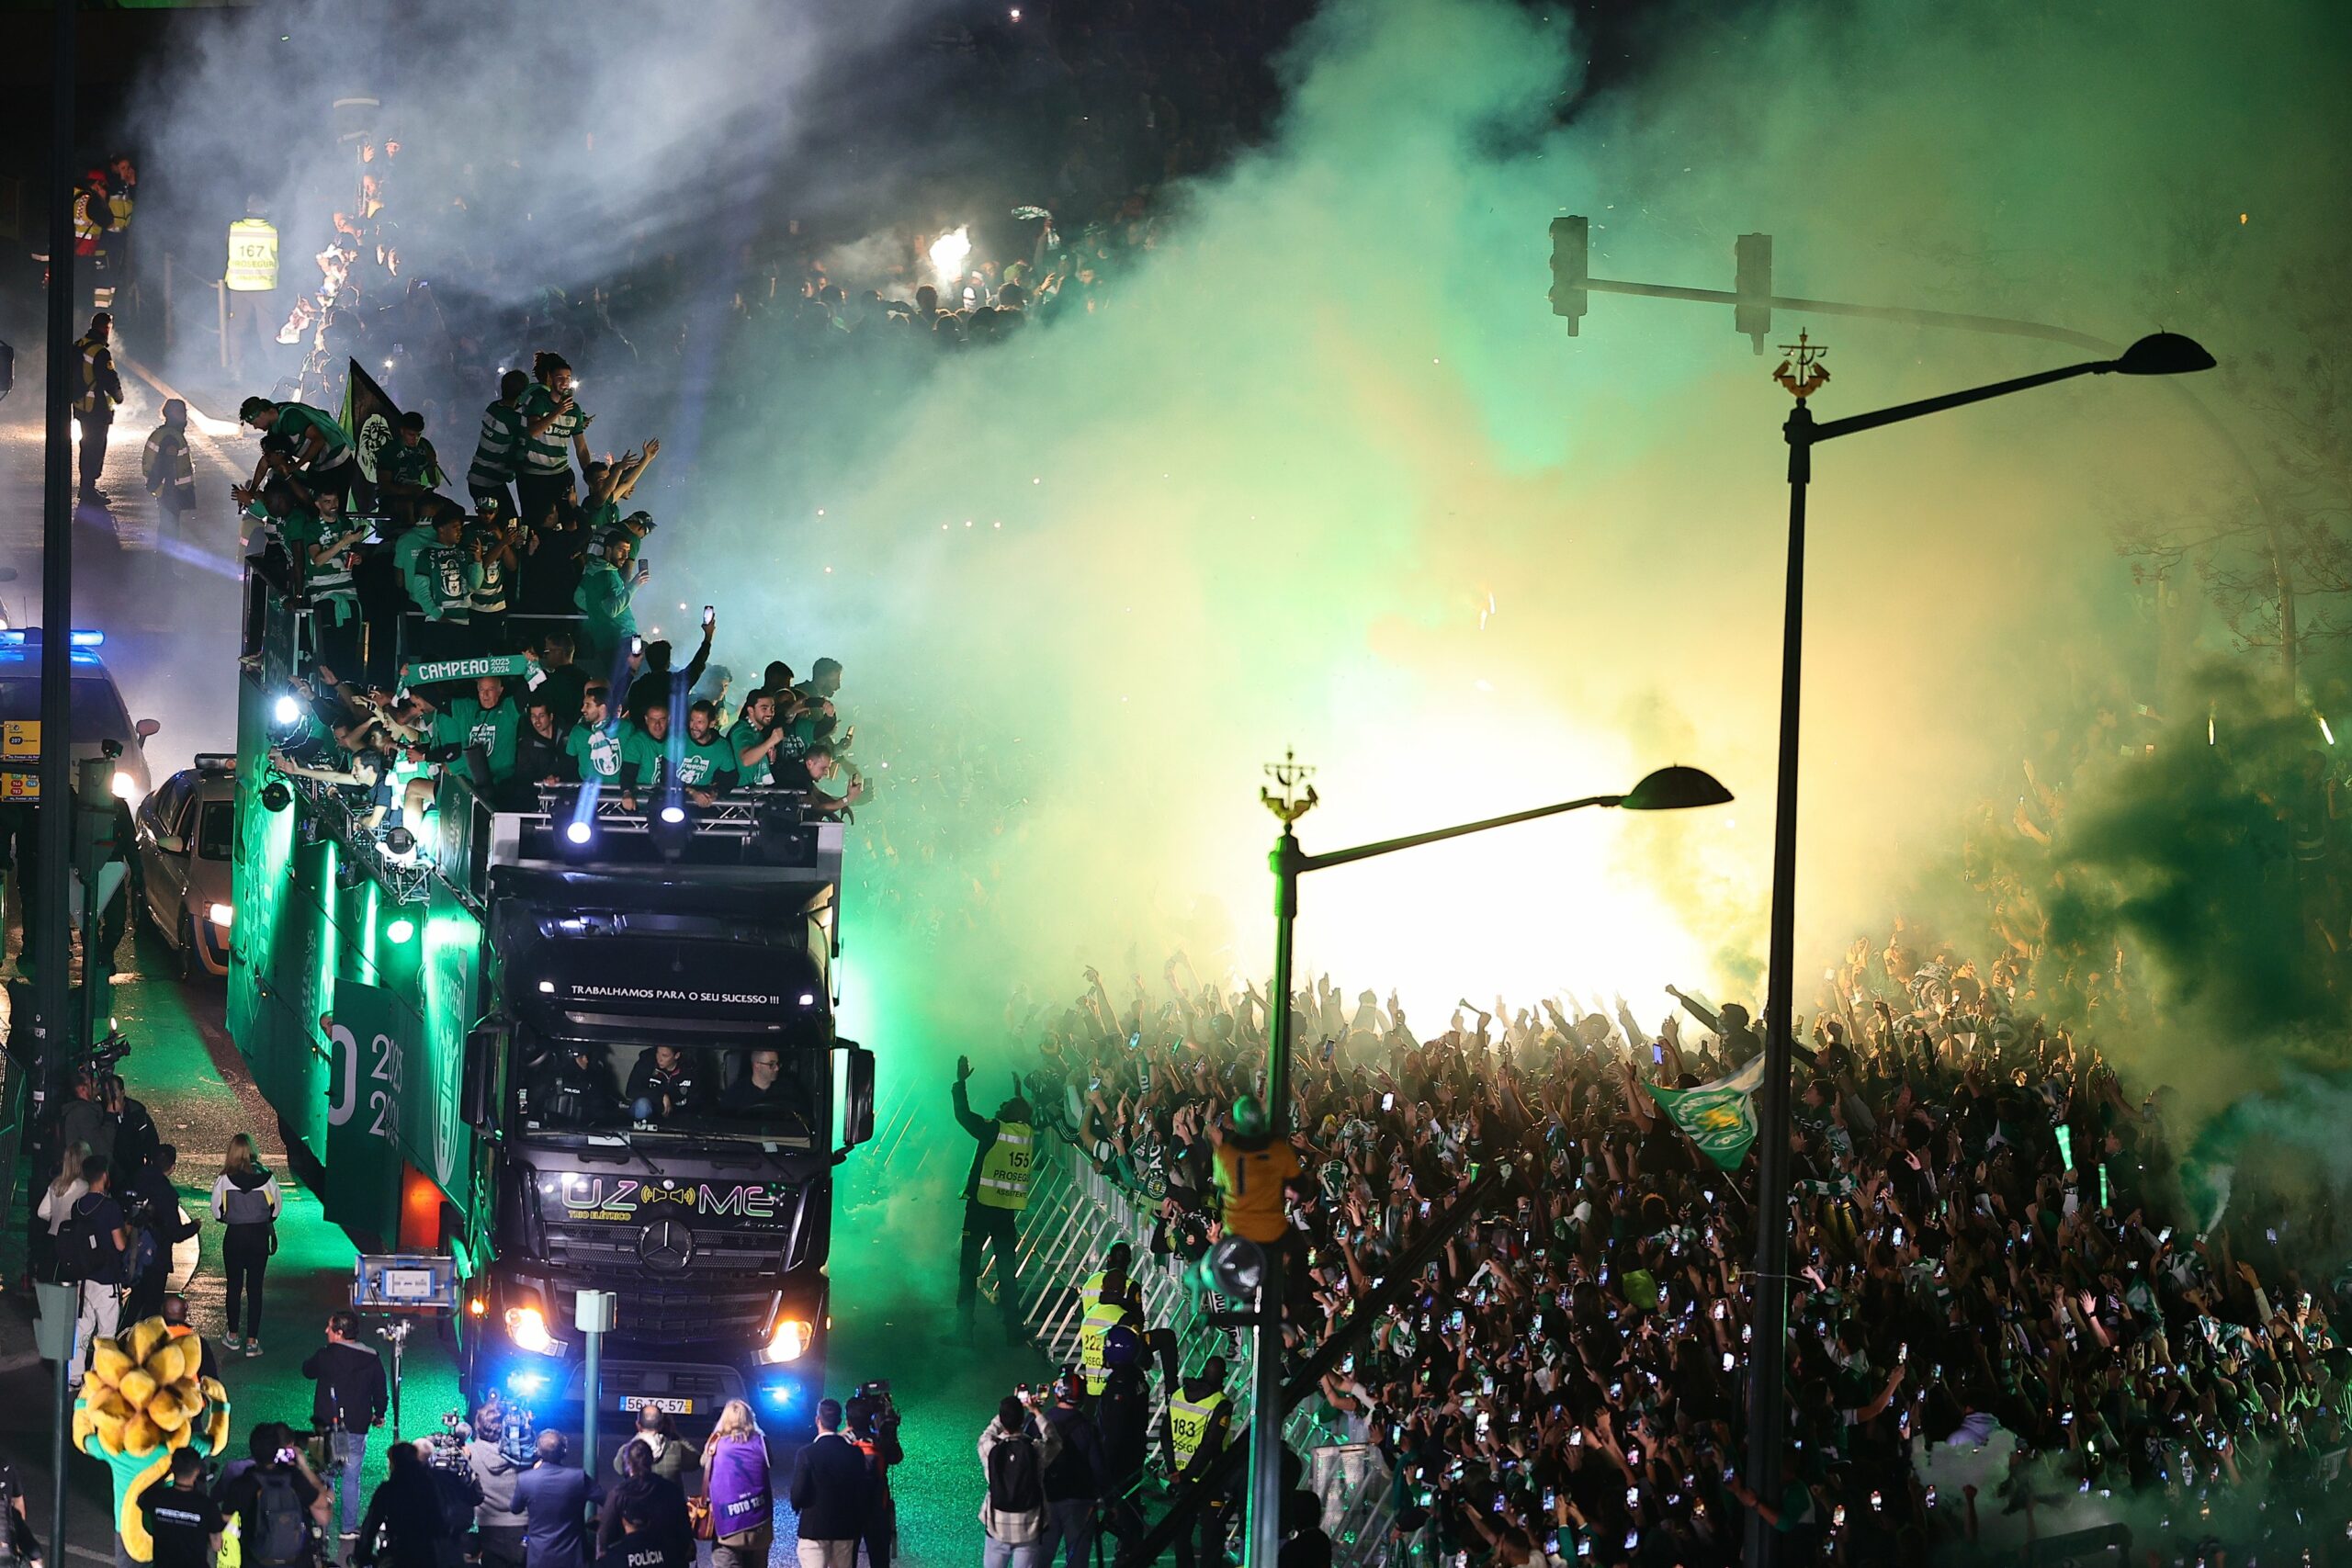 As fans celebrate title in dominant fashion, a summer of farewells might lie ahead for Sporting